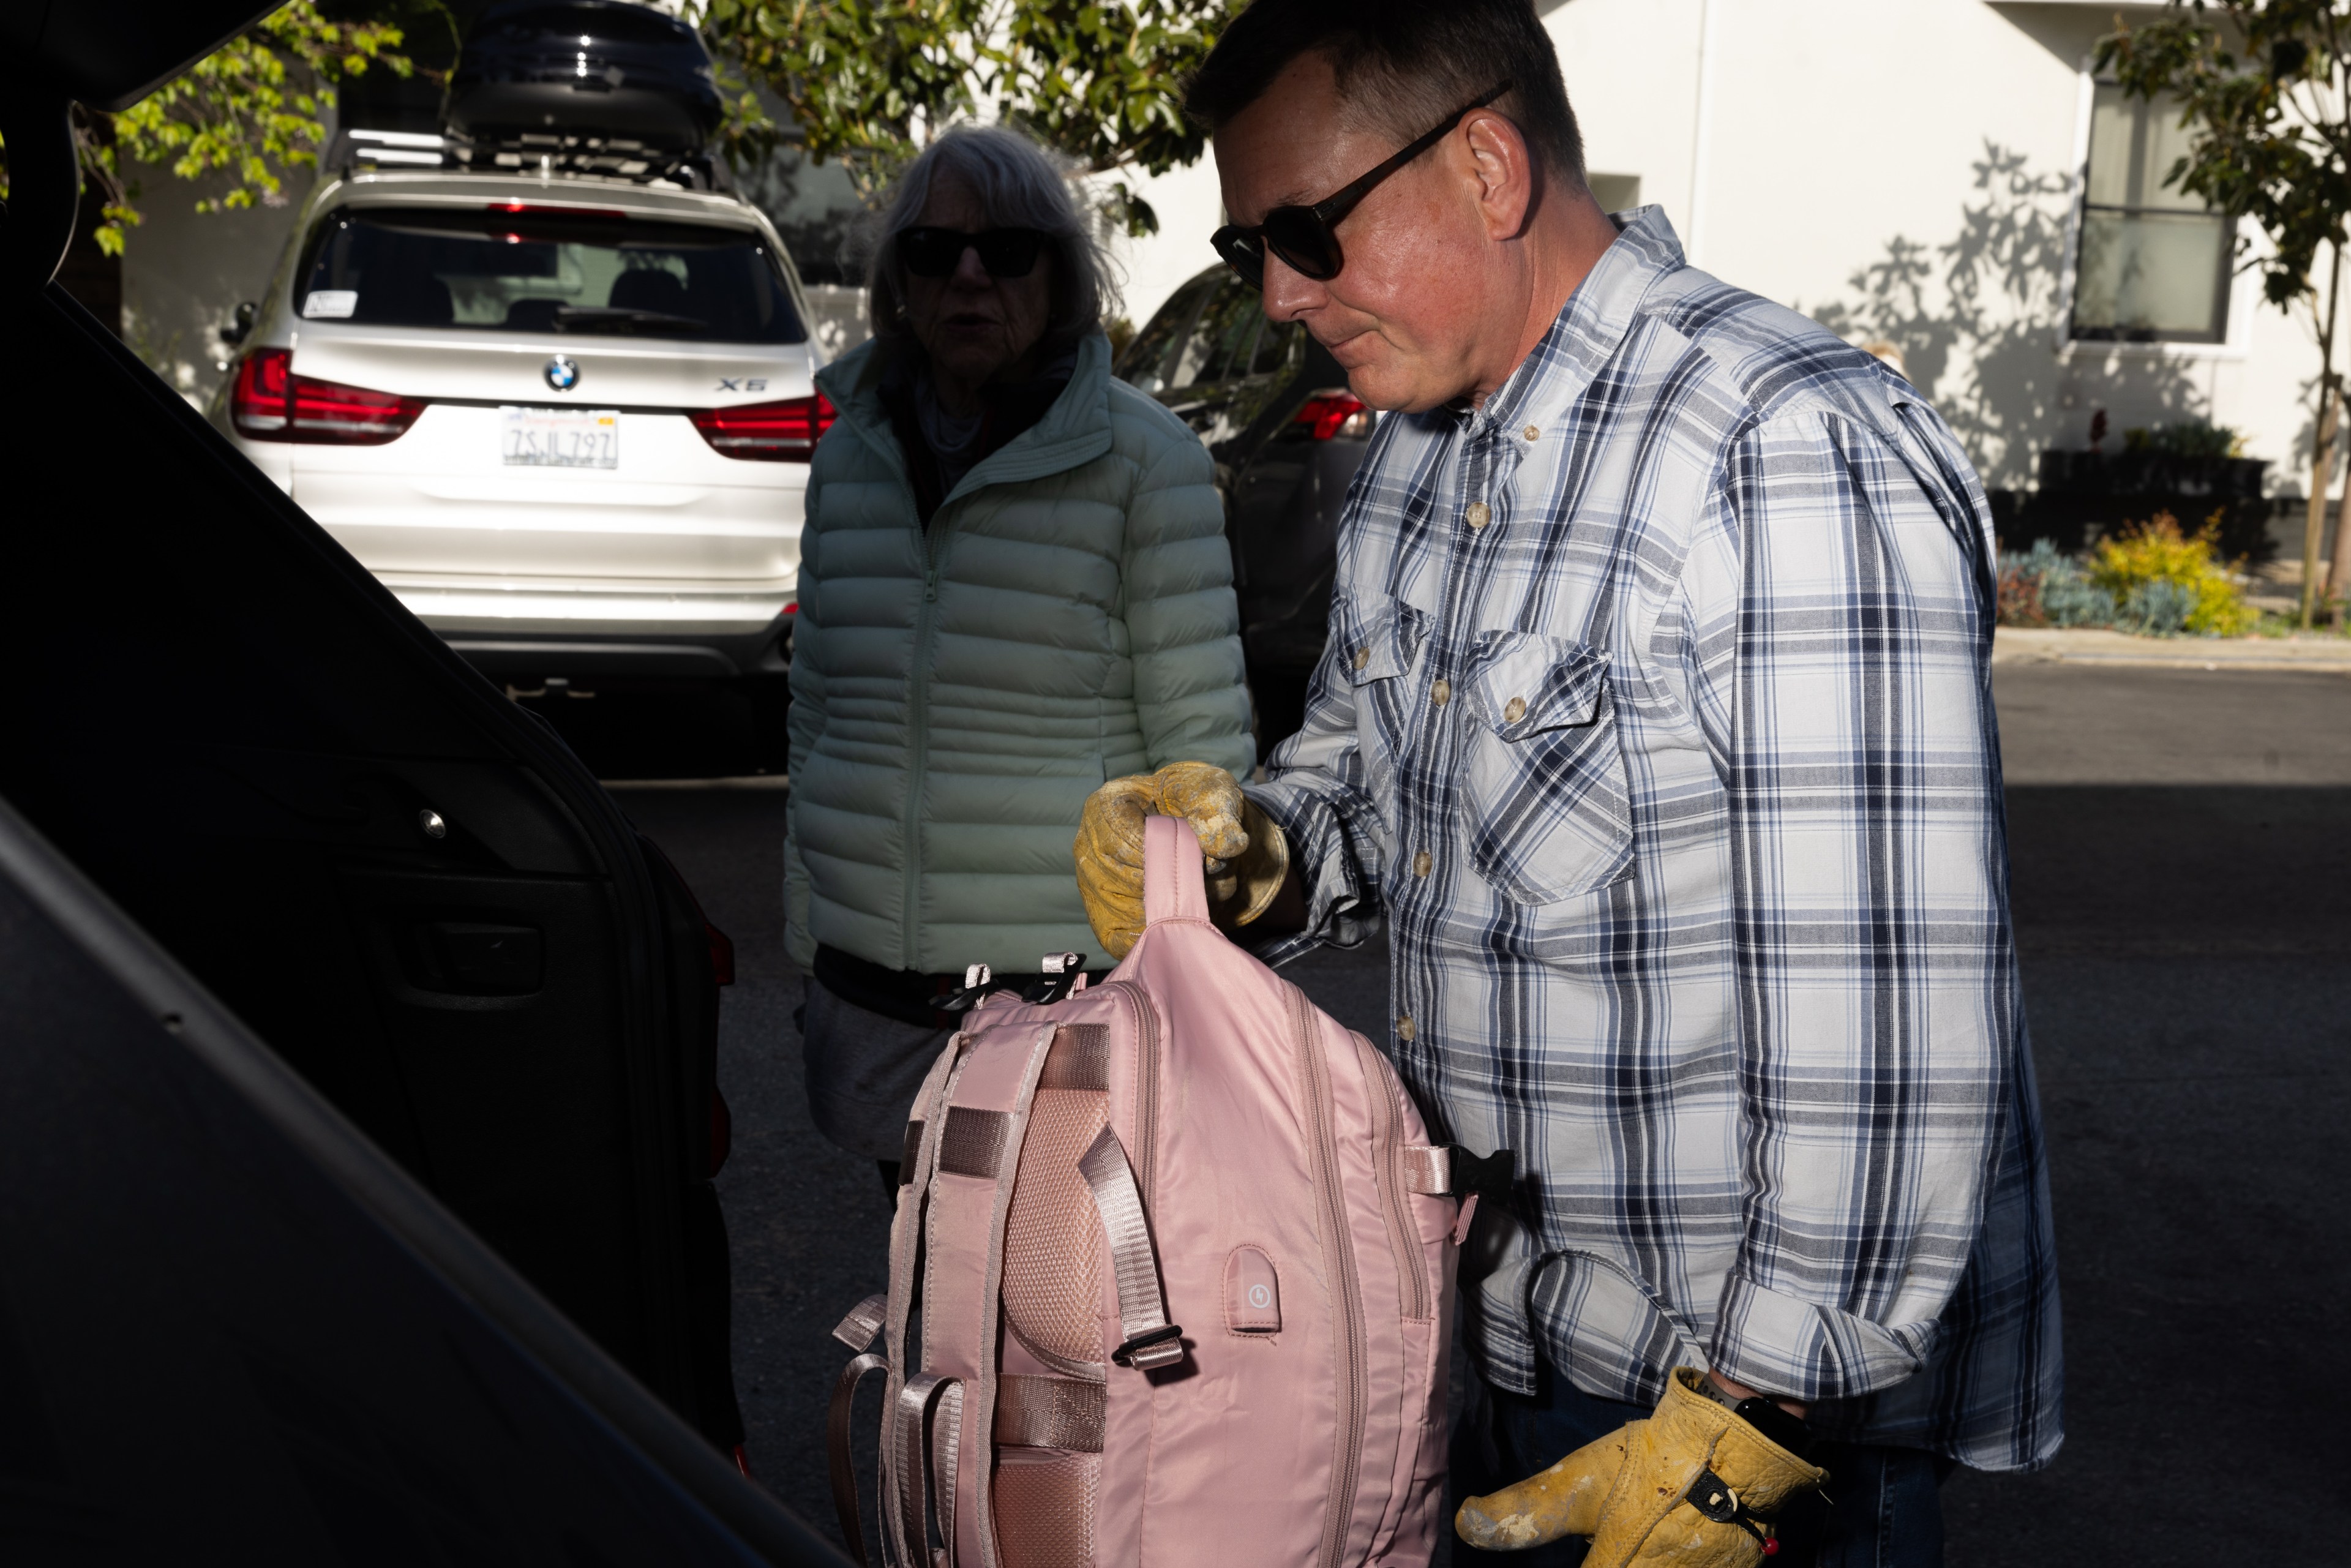 A man in a checked shirt loads a pink backpack into a car trunk; an older woman in a light green jacket observes.